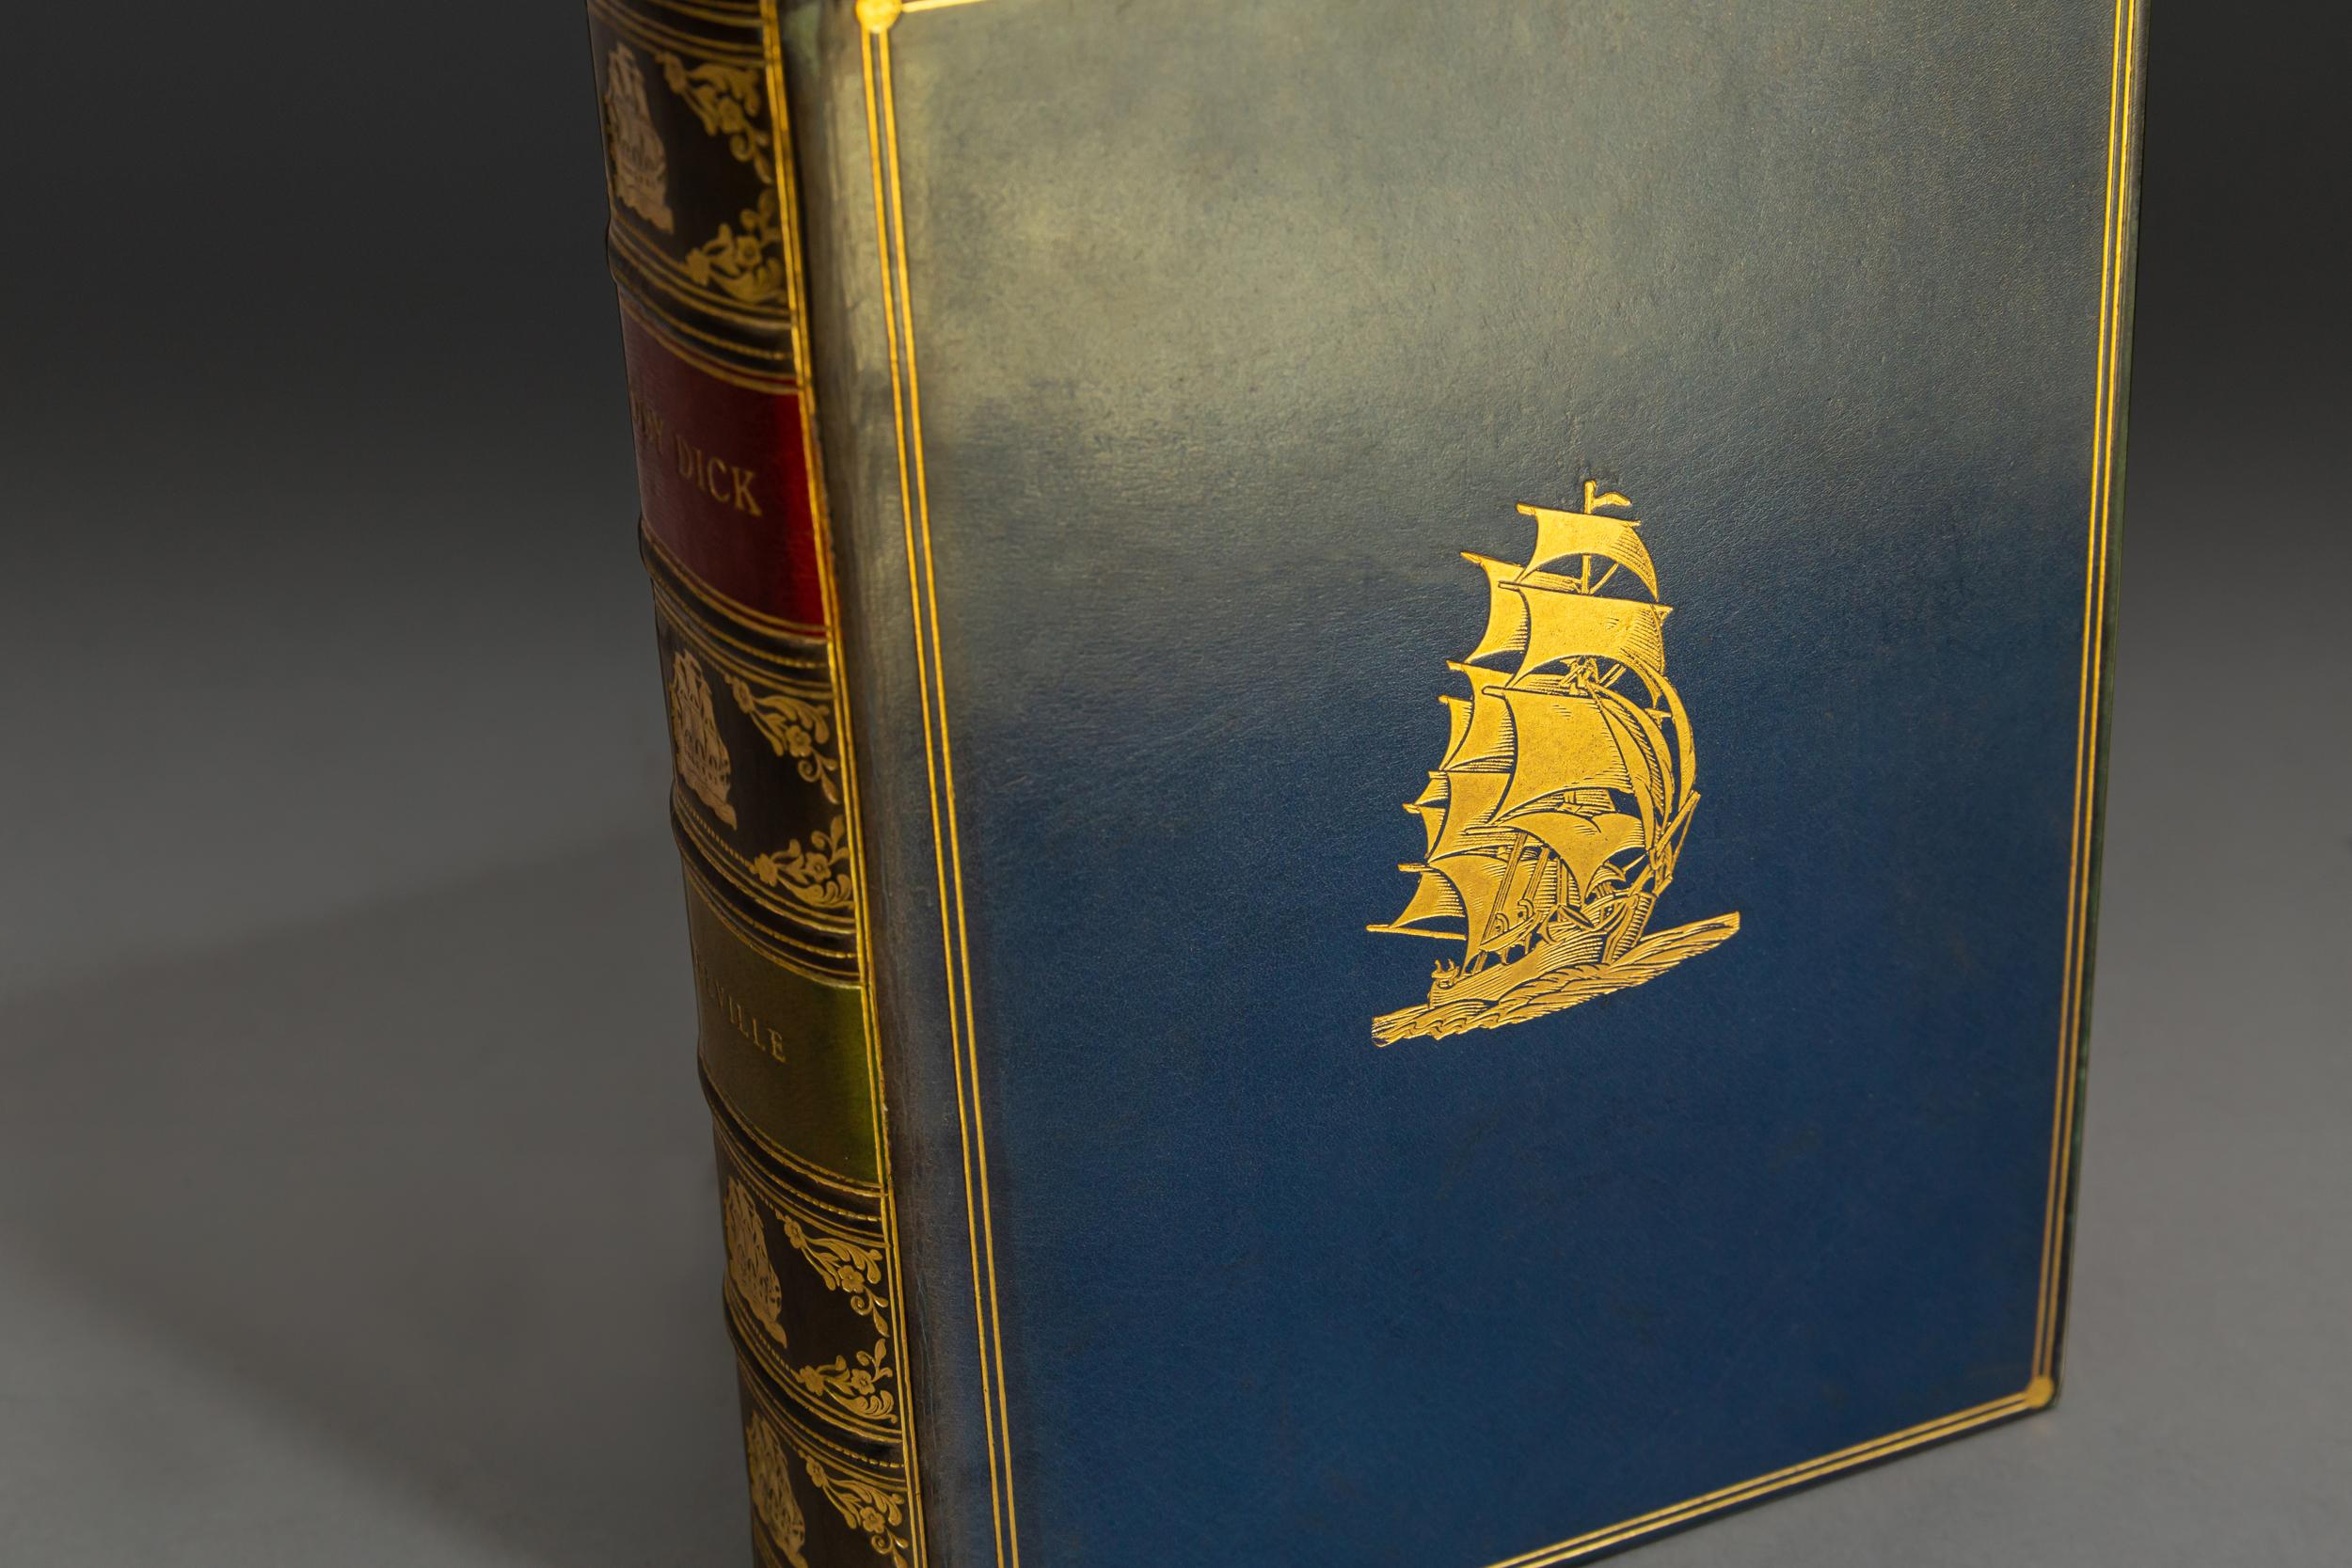 1 volume.

Illustrated by Rockwell Kent.
Bound in full blue calf by Riviere, all edges gilt, raised bands, ornate gilt
On spine, nautical gilt design on front cover.

Published: New York: Random House, 1930. First Trade Edition.

Measures: H